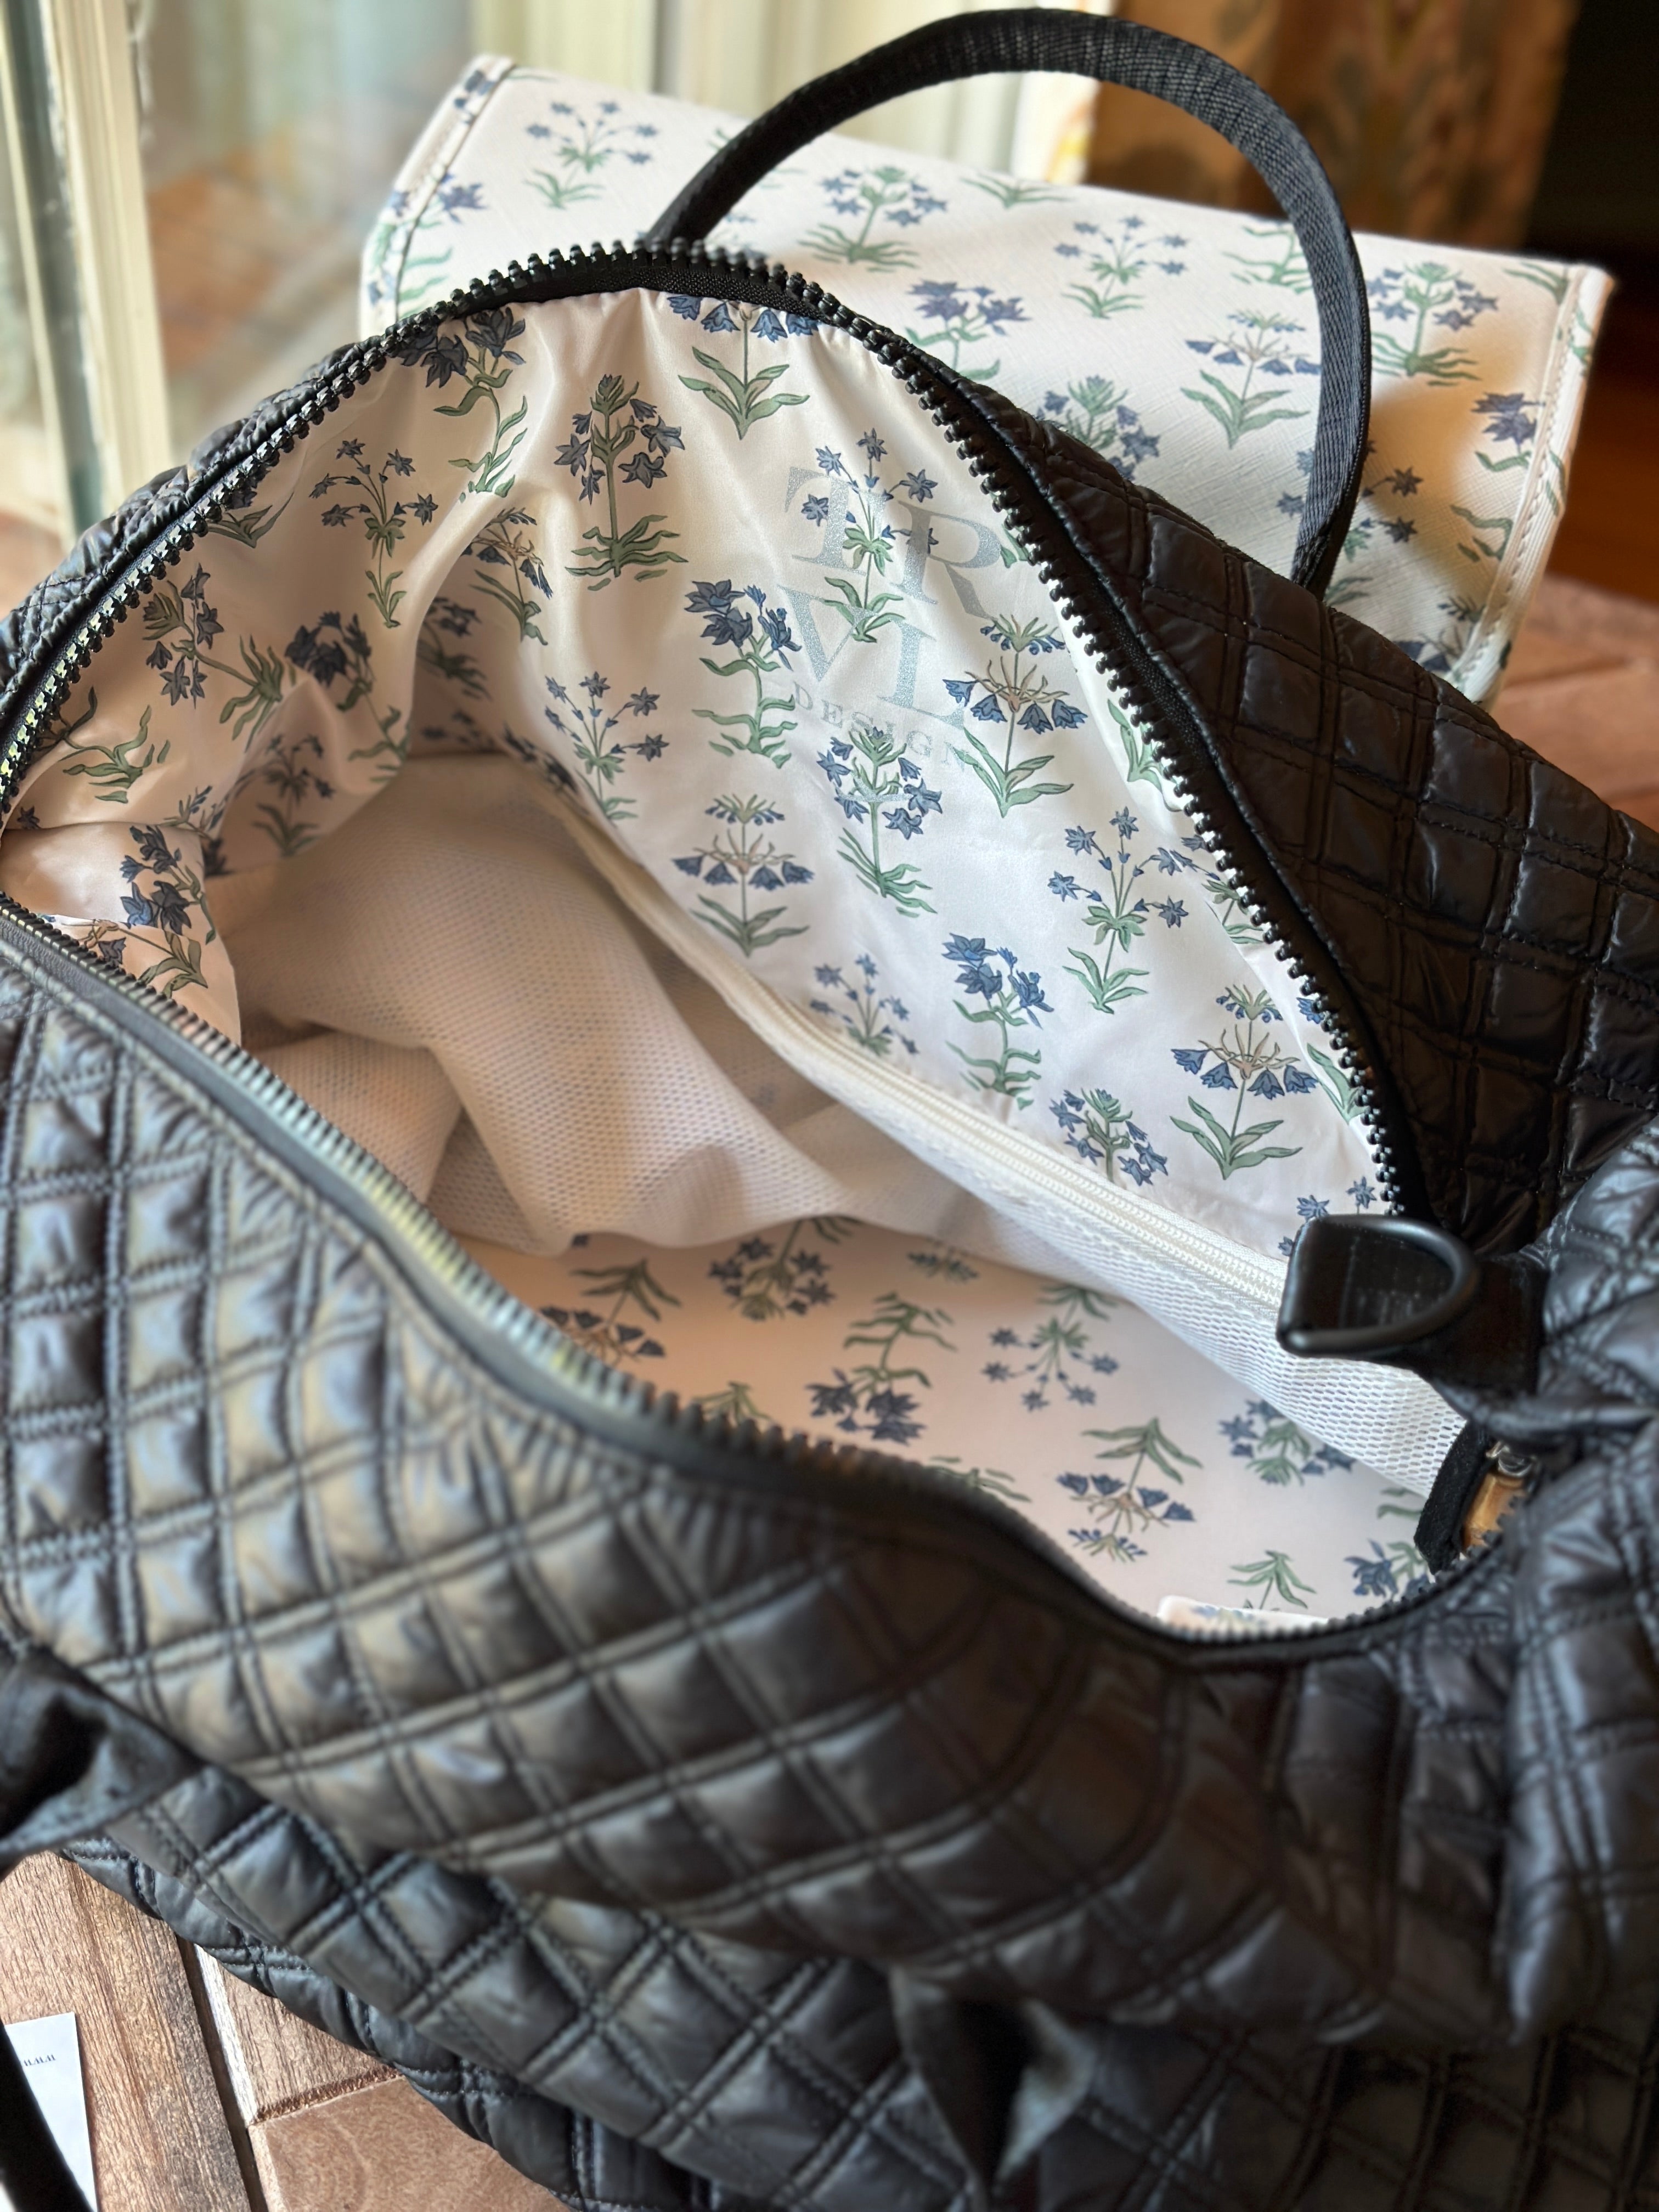 MZ Wallace Jimmy Quilted Shell Tote